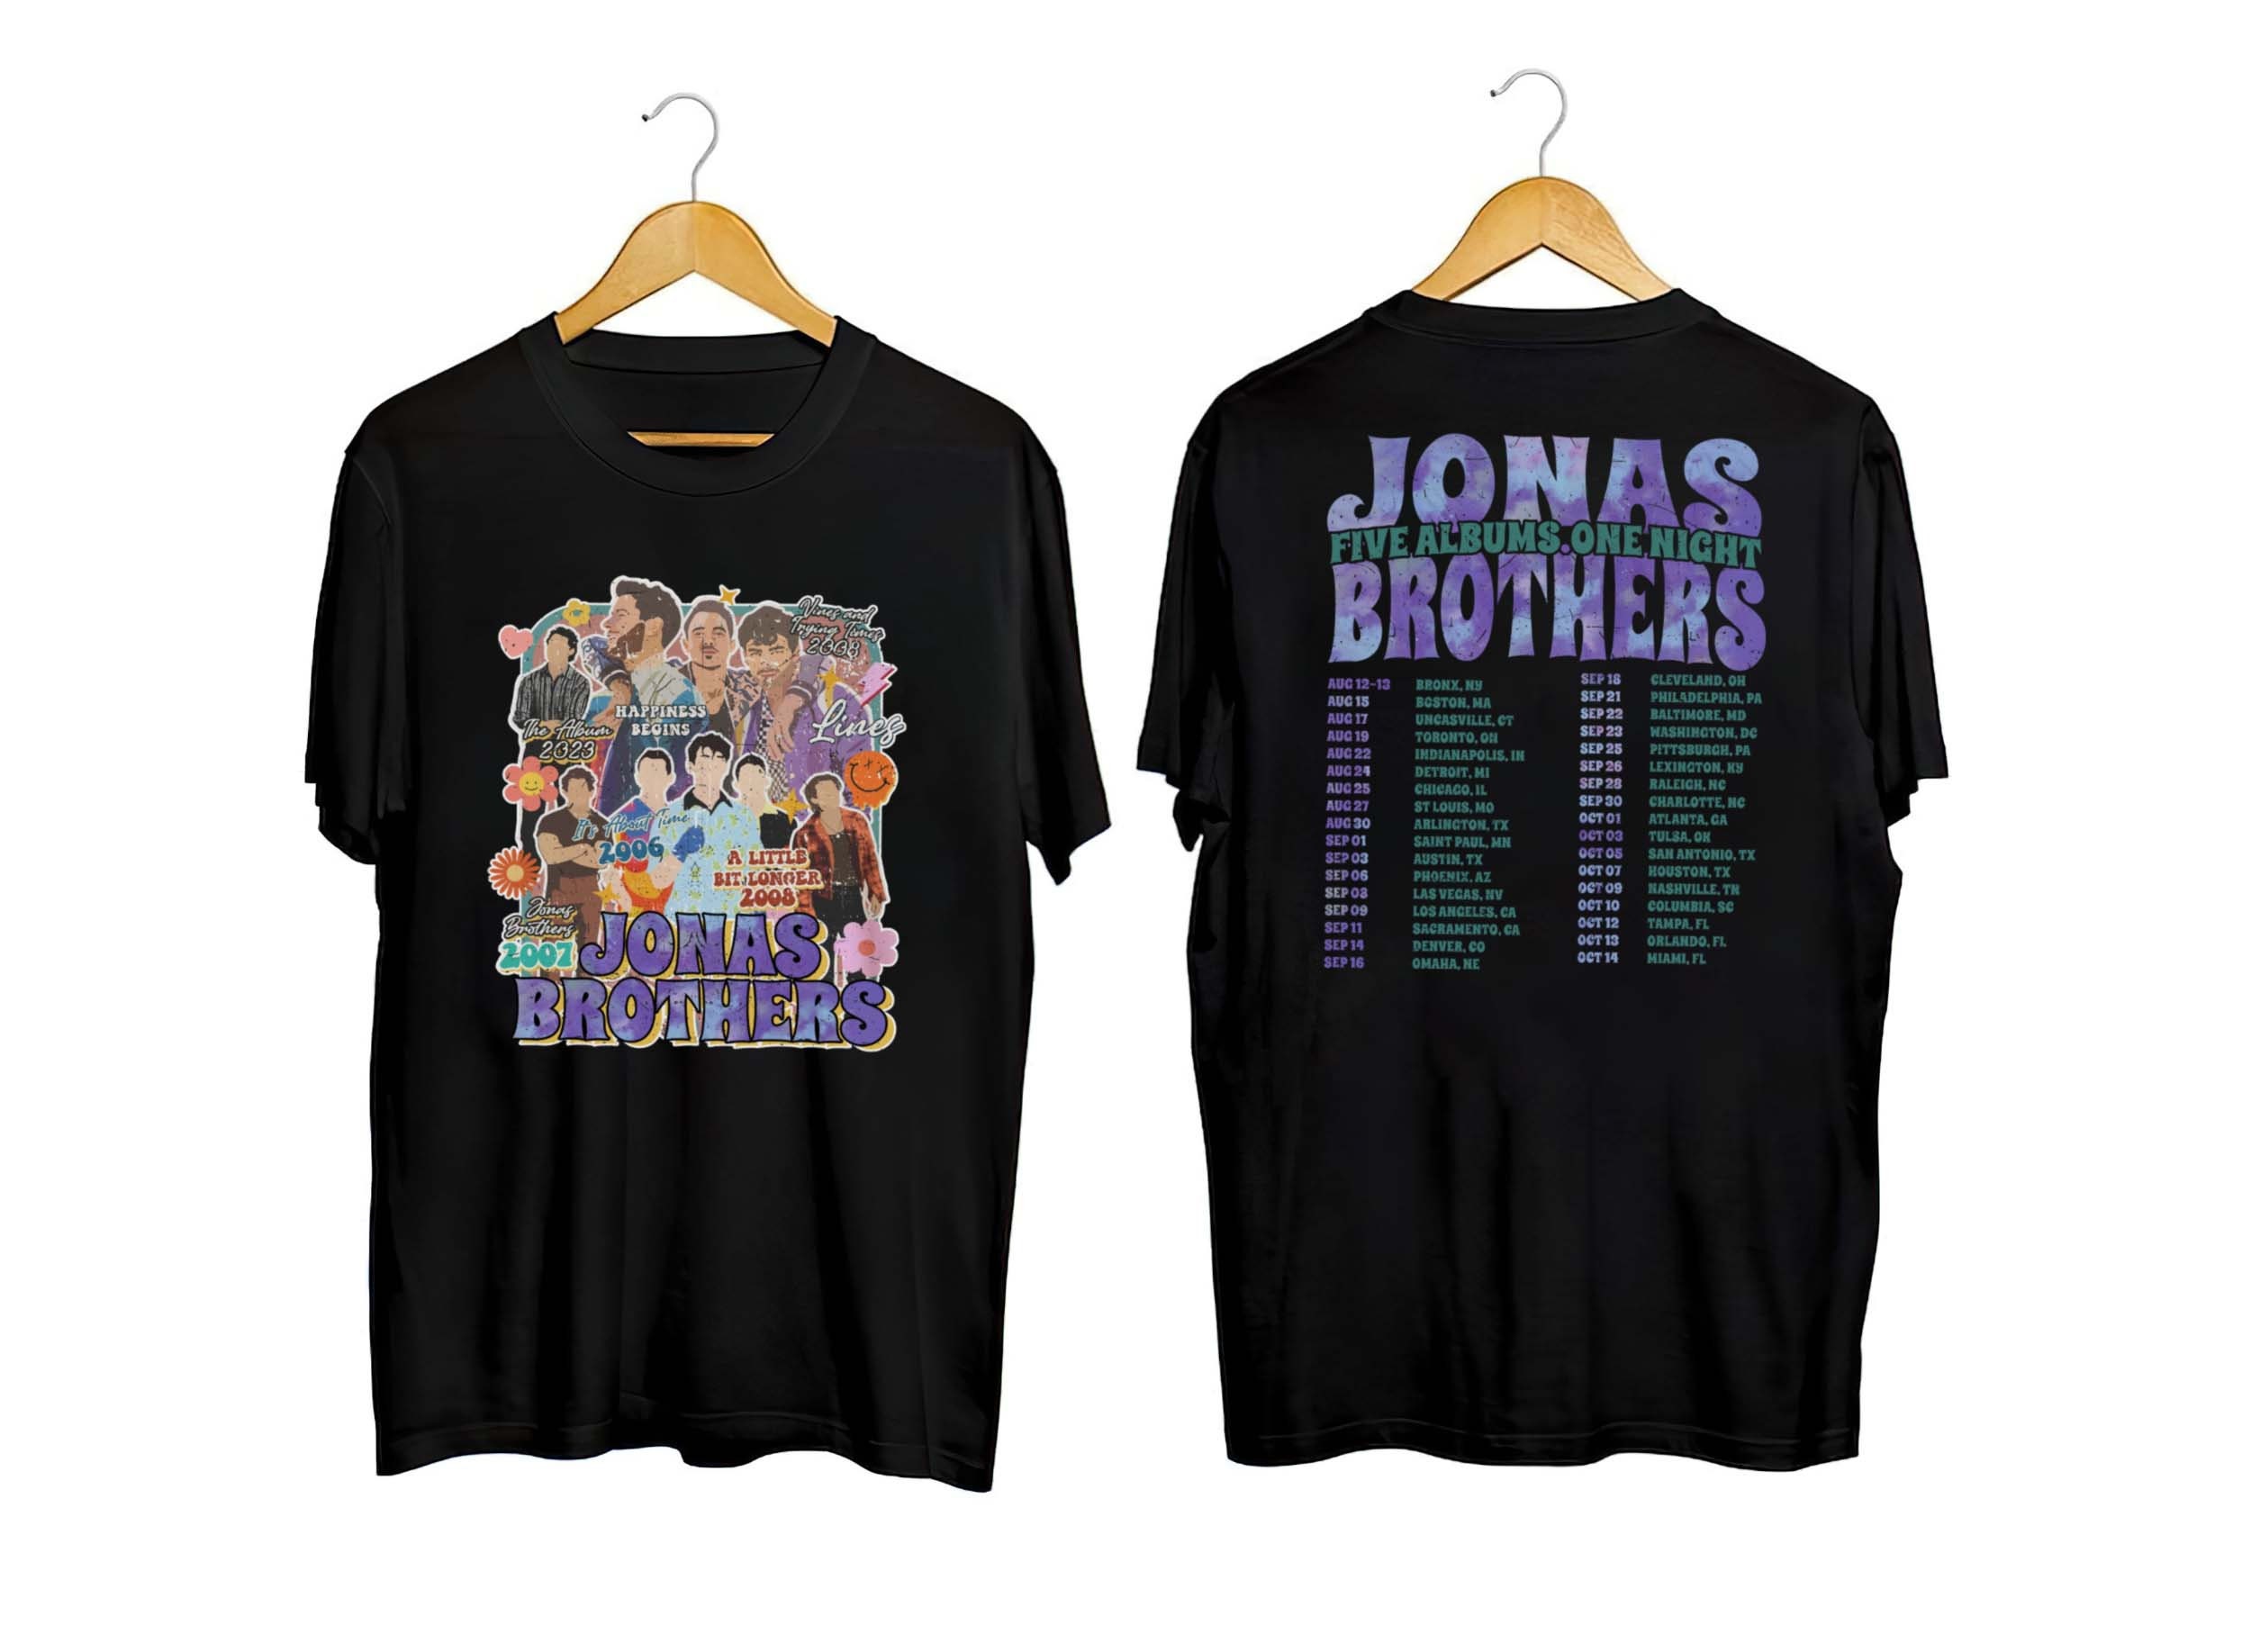 Discover Jonas Brothers Music Band T-shirt, Five Albums One Night Tour 2023 Shirt, Gift For Fans